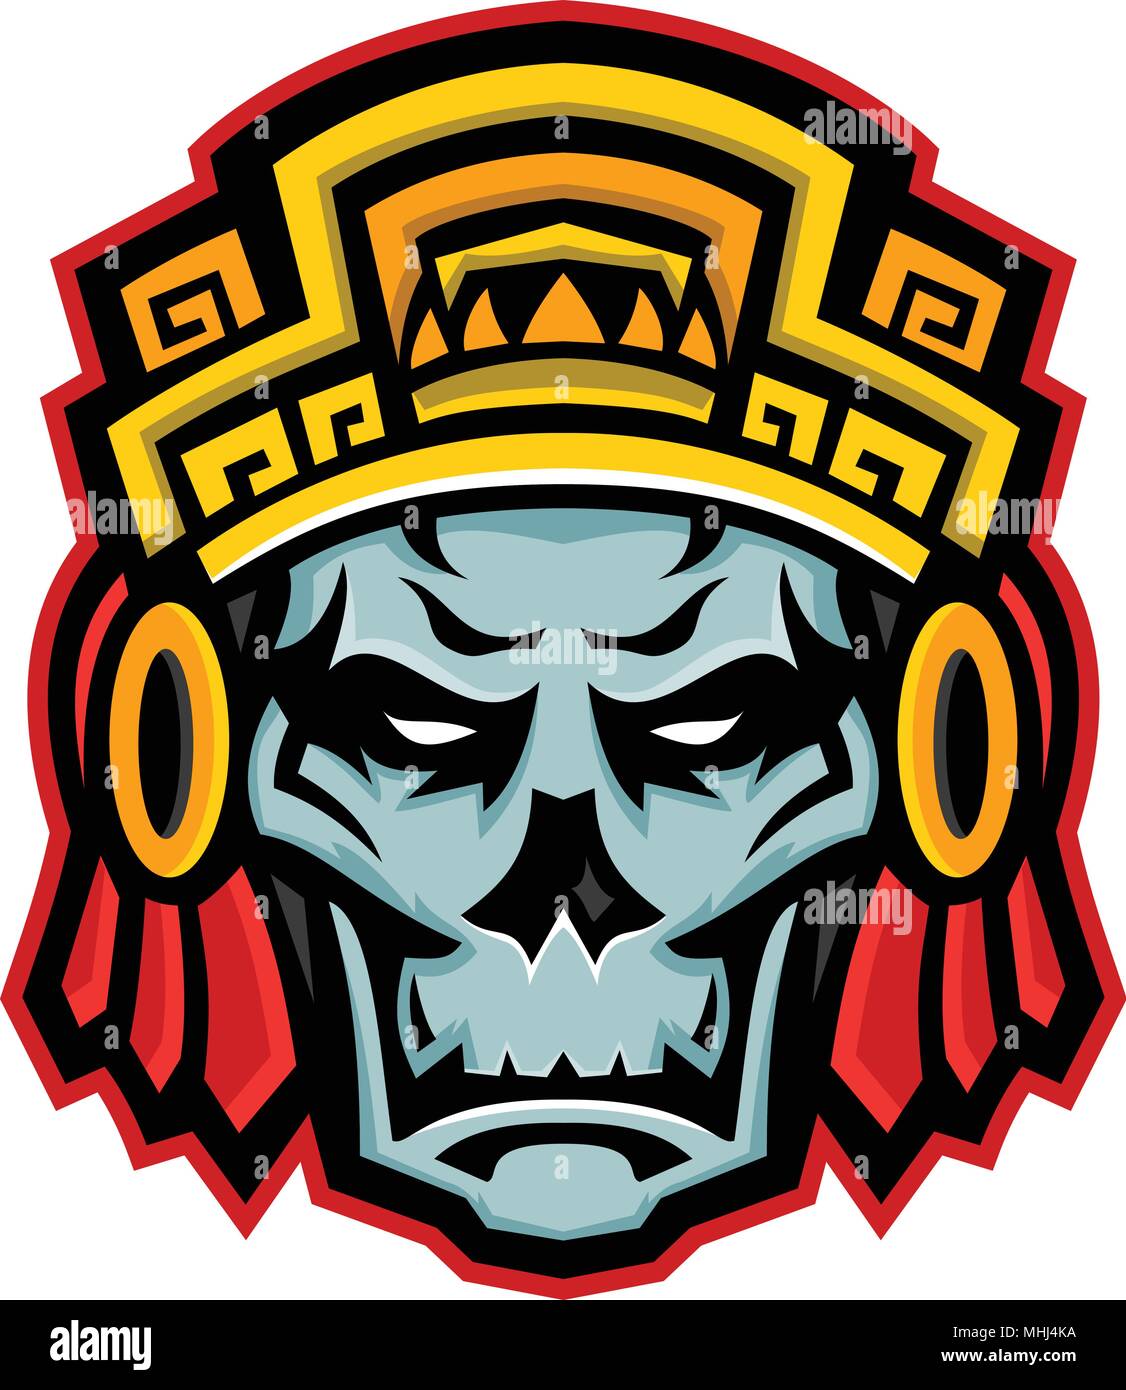 Mascot icon illustration of a skull of a noble Aztec warrior wearing wood helmet or headdress viewed front on isolated background in retro style. Stock Vector